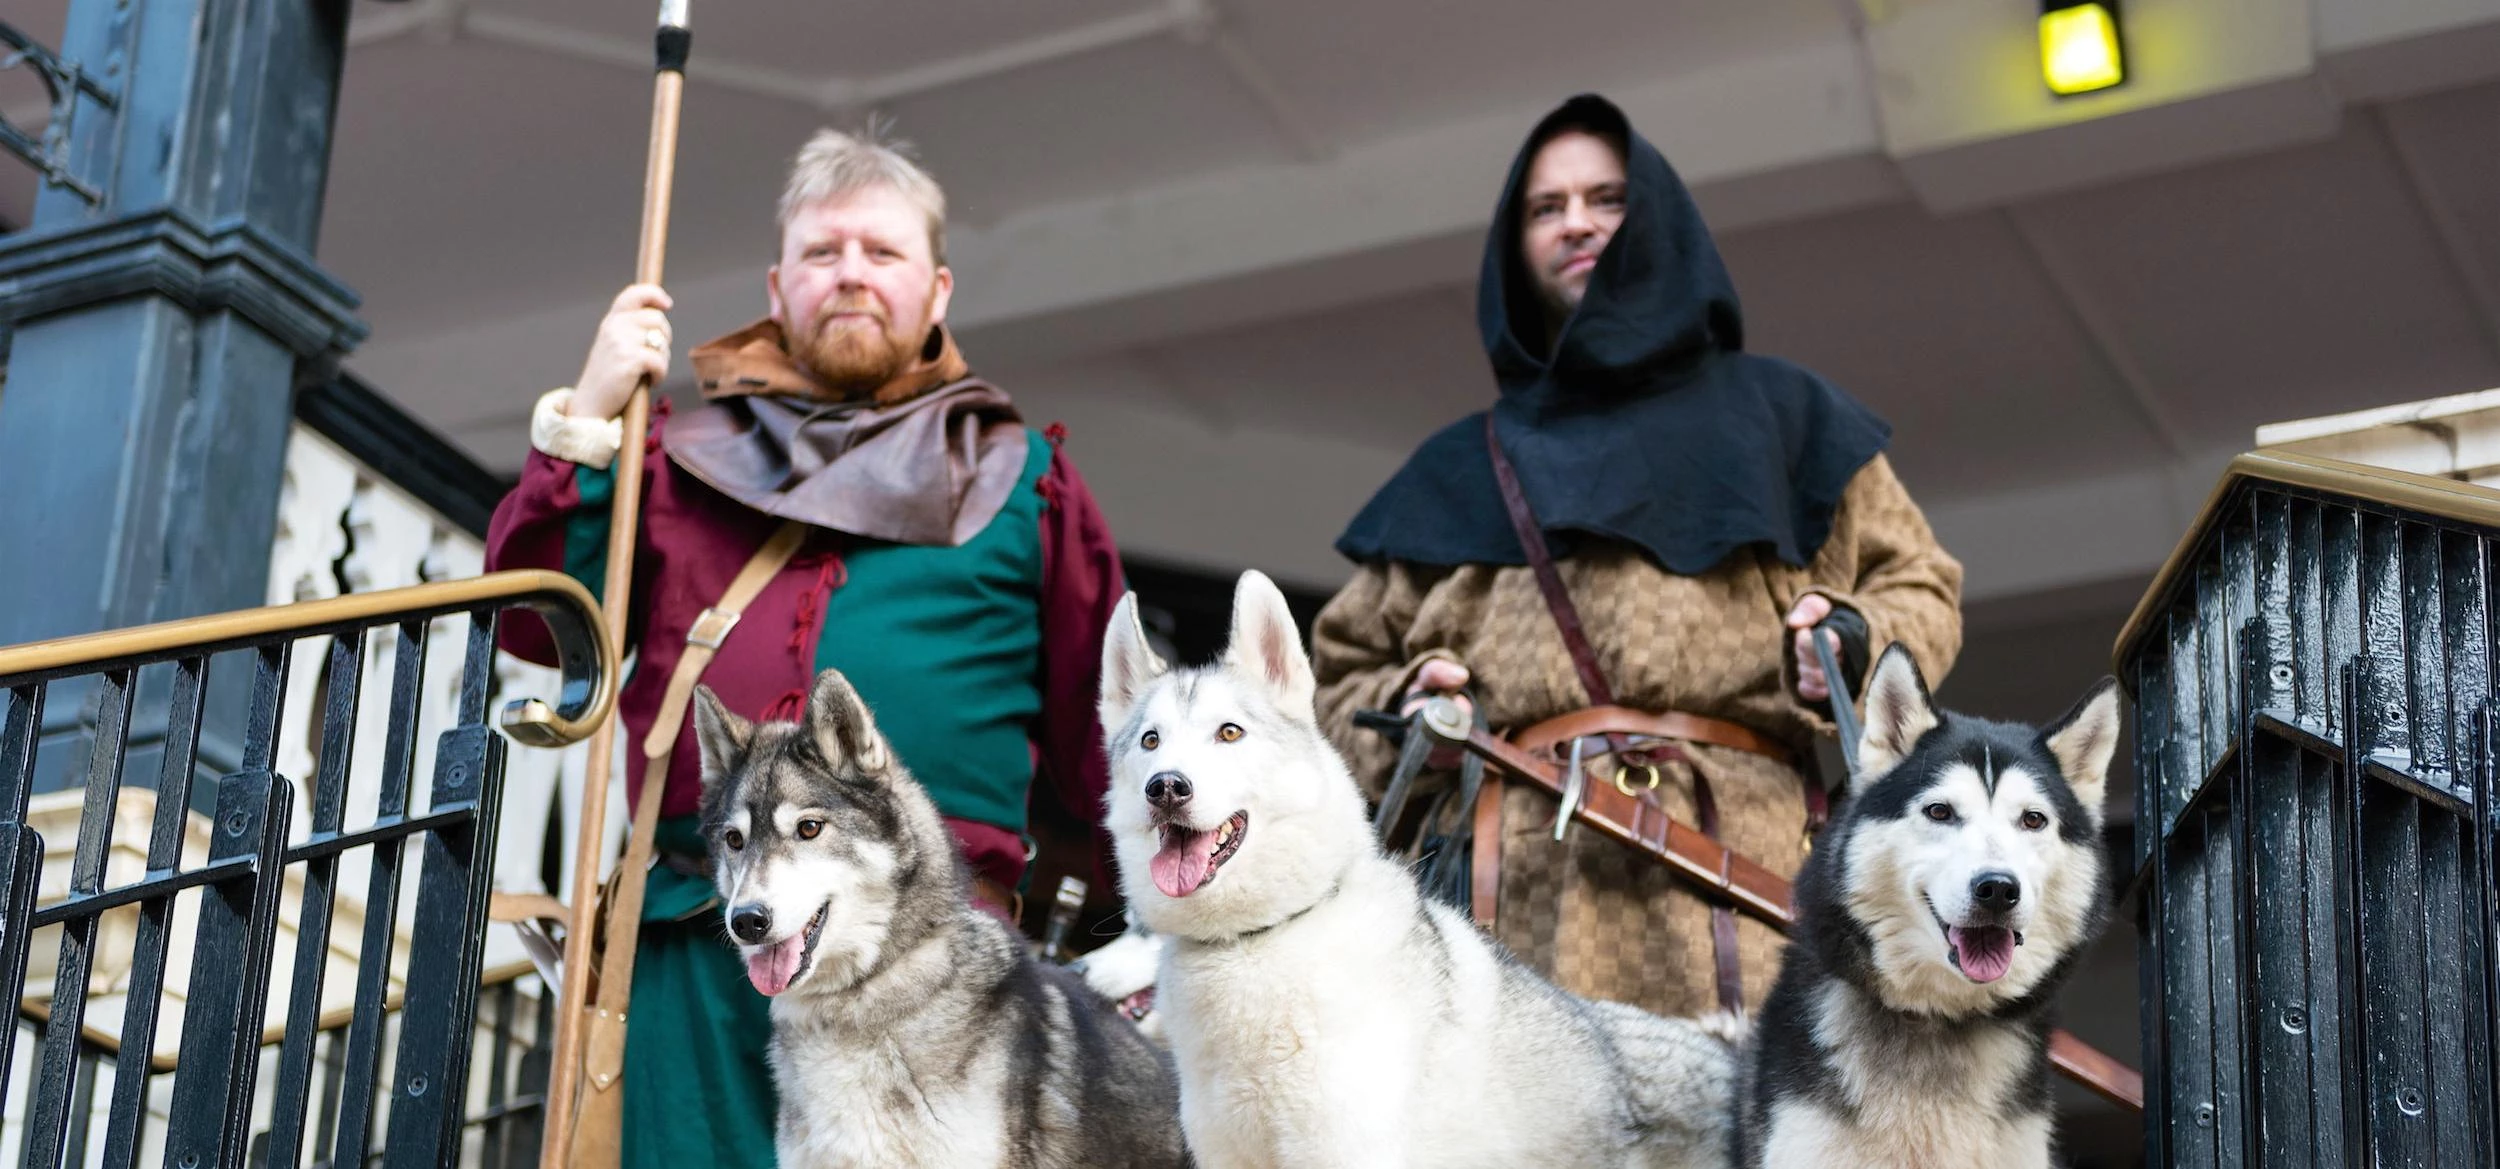 Medieval characters and Siberian huskies were in Chester city centre for the launch of Deva Codex Wo